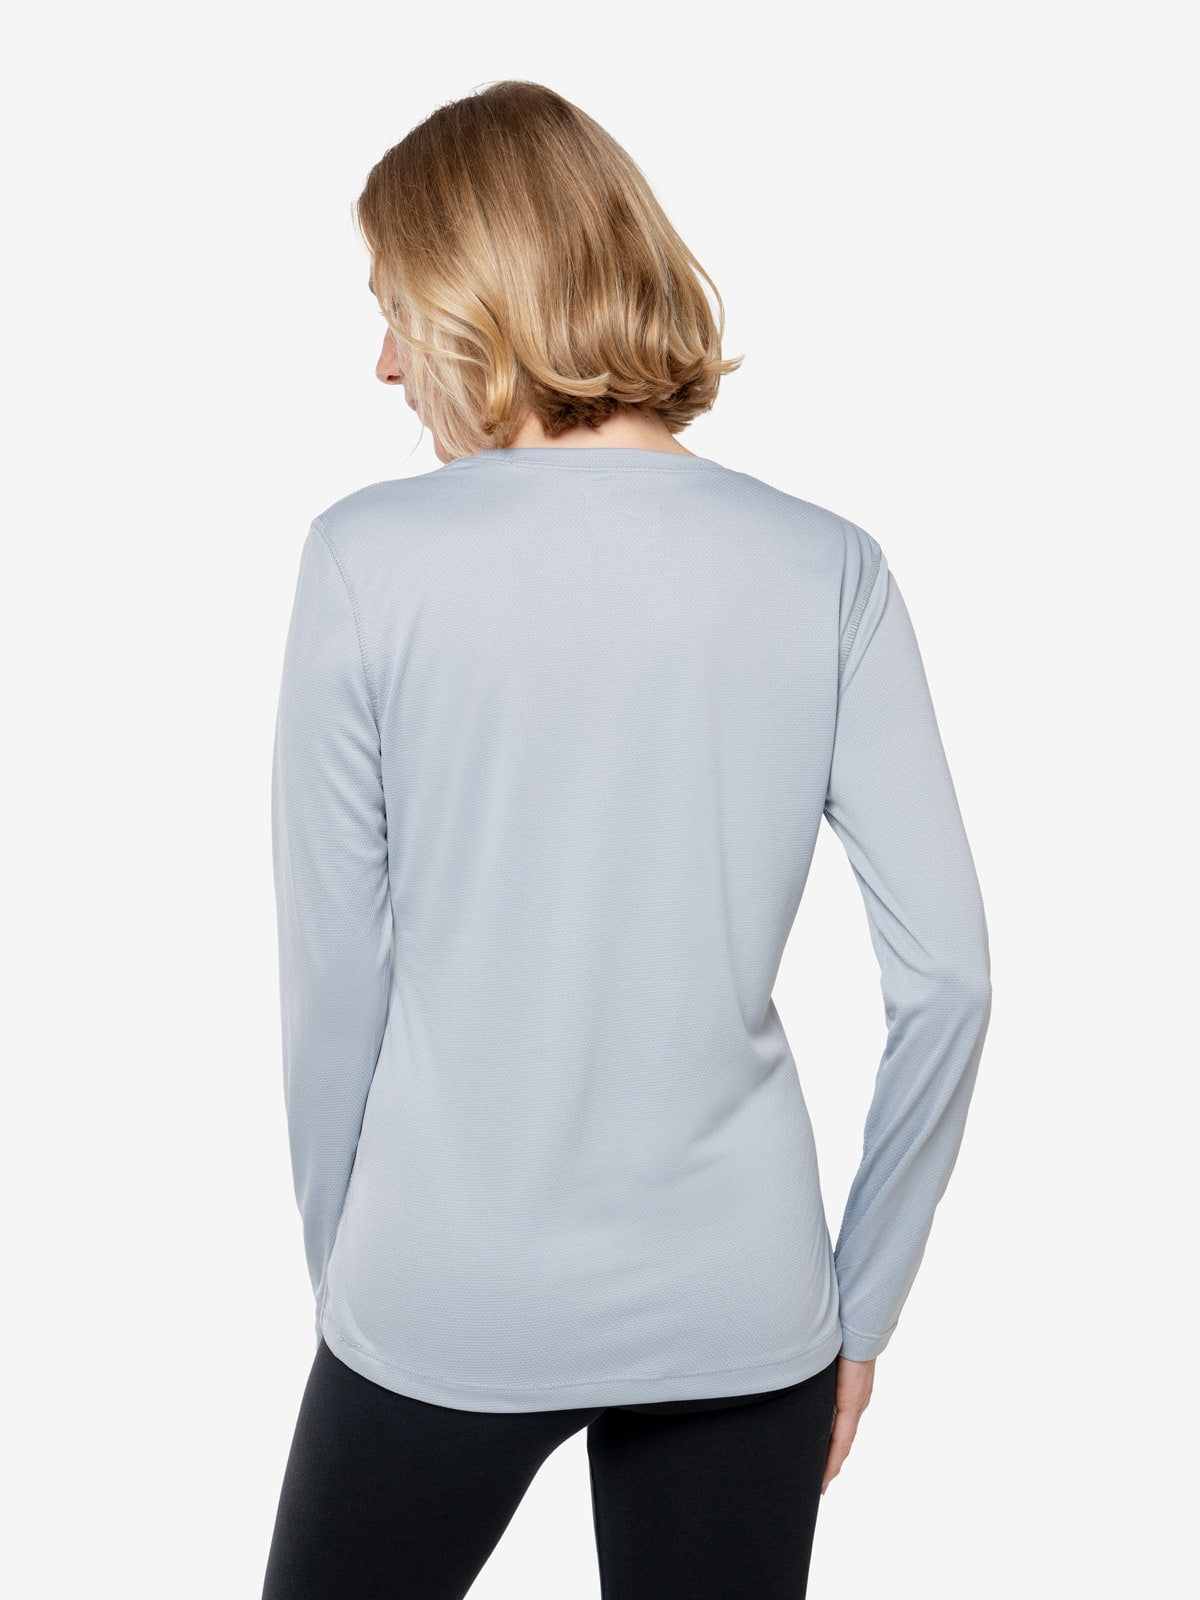 Women's Insect Repellent Long Sleeve Tech T-Shirt – Insect Shield